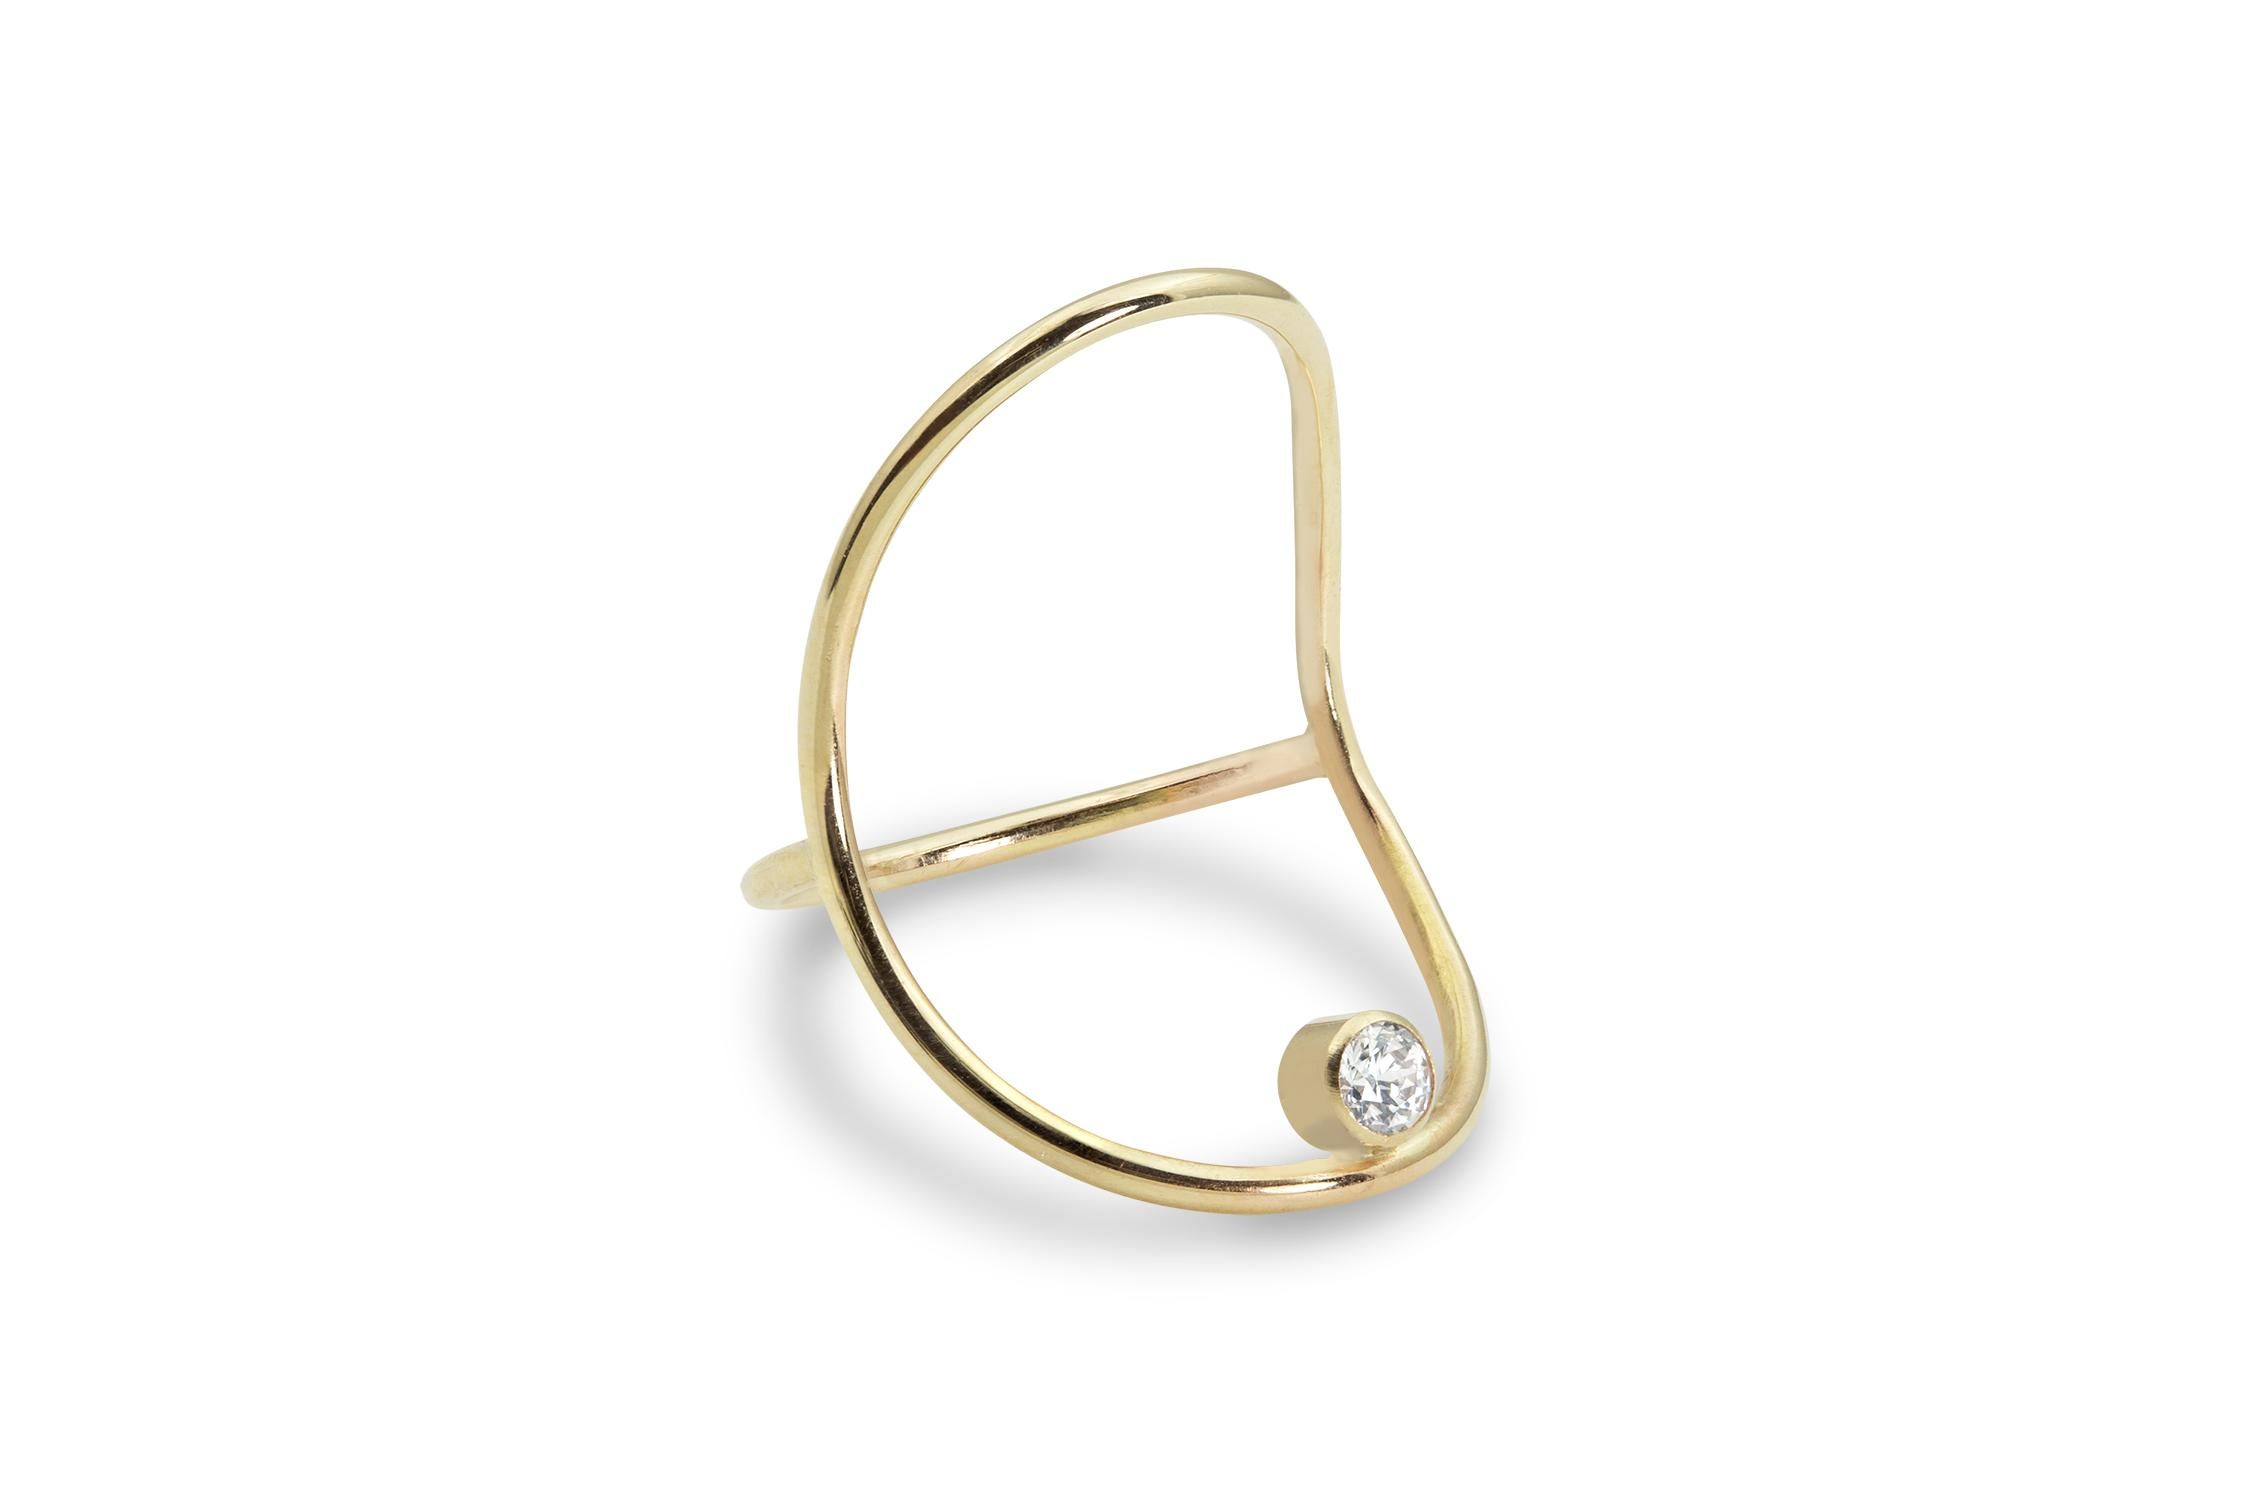 An elegant hand-formed solid 14k gold oval holds a brilliant white .10ct diamond that seems to float on the finger.  It's bold and delicate at the same time - minimal with a bit of surrealist magic, and it's streamlined design makes it very